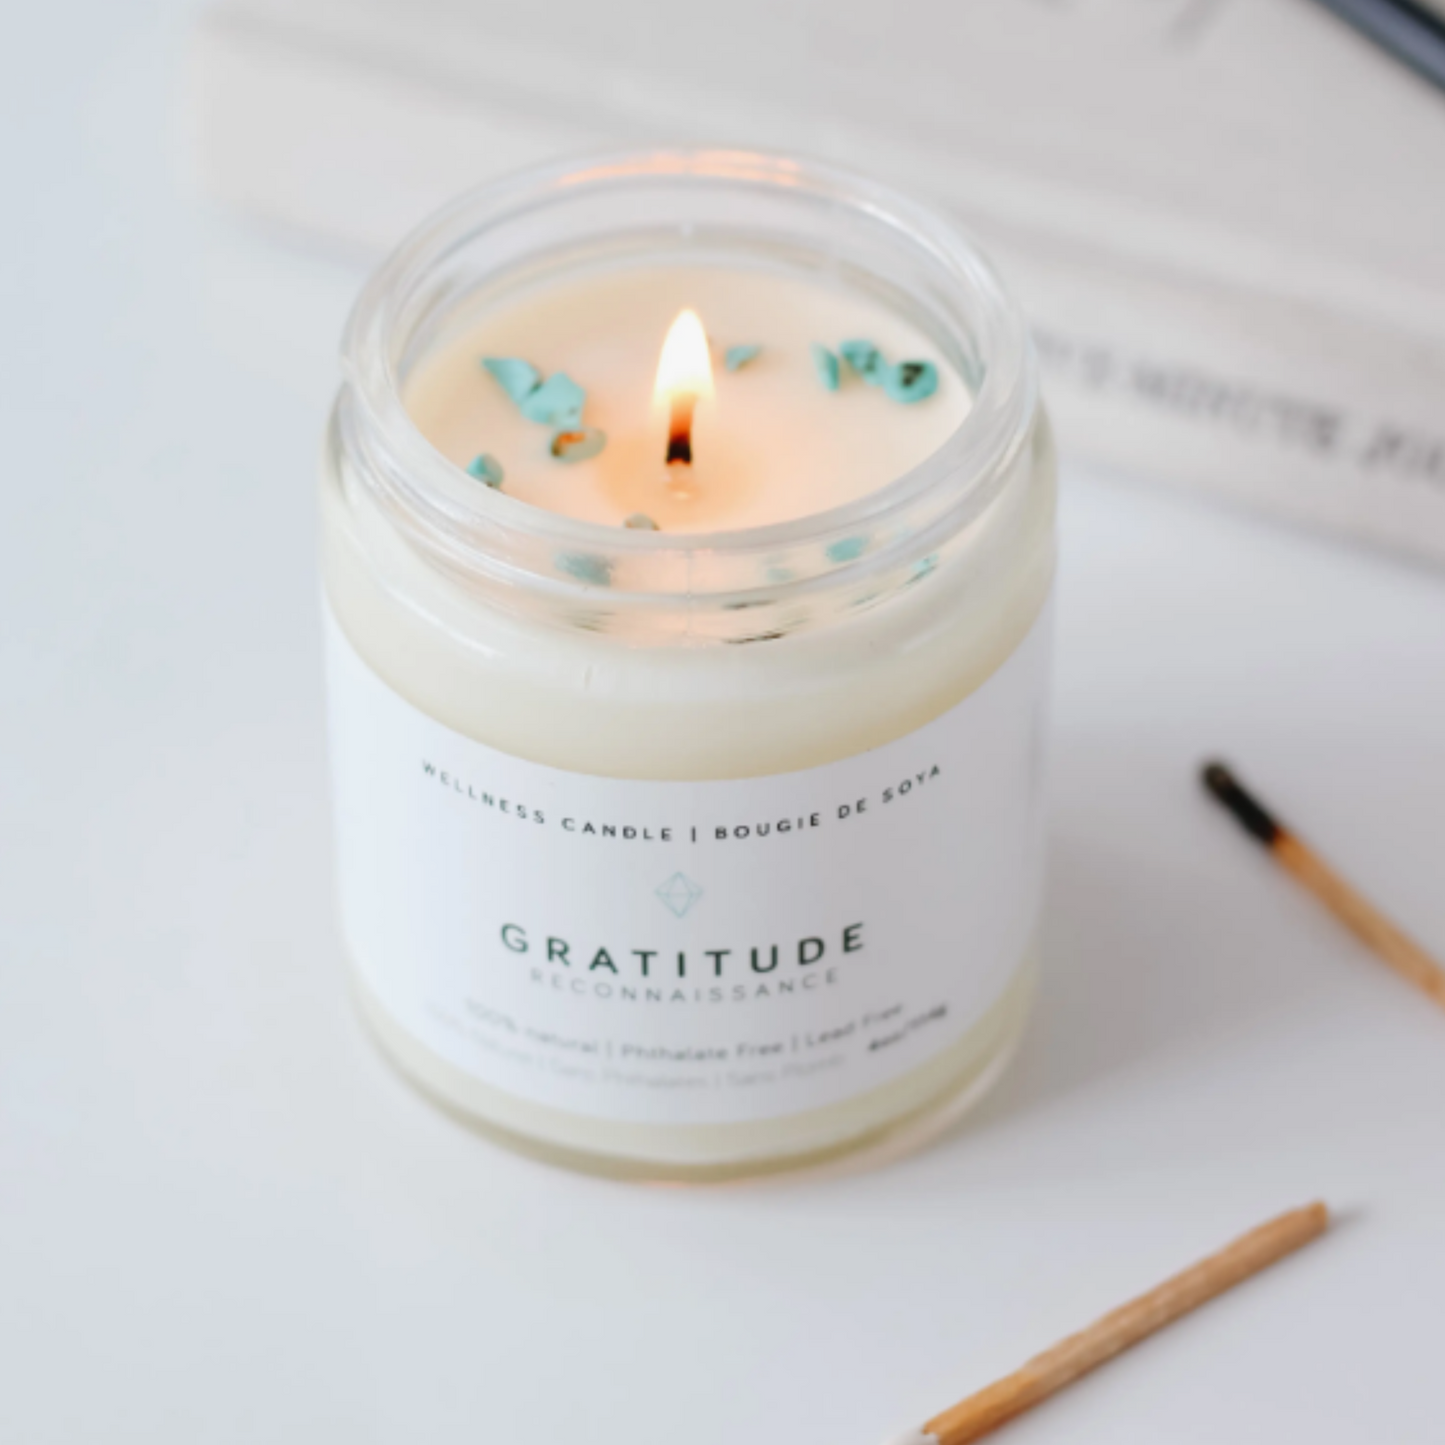 Gratitude Crystal Soy Candle